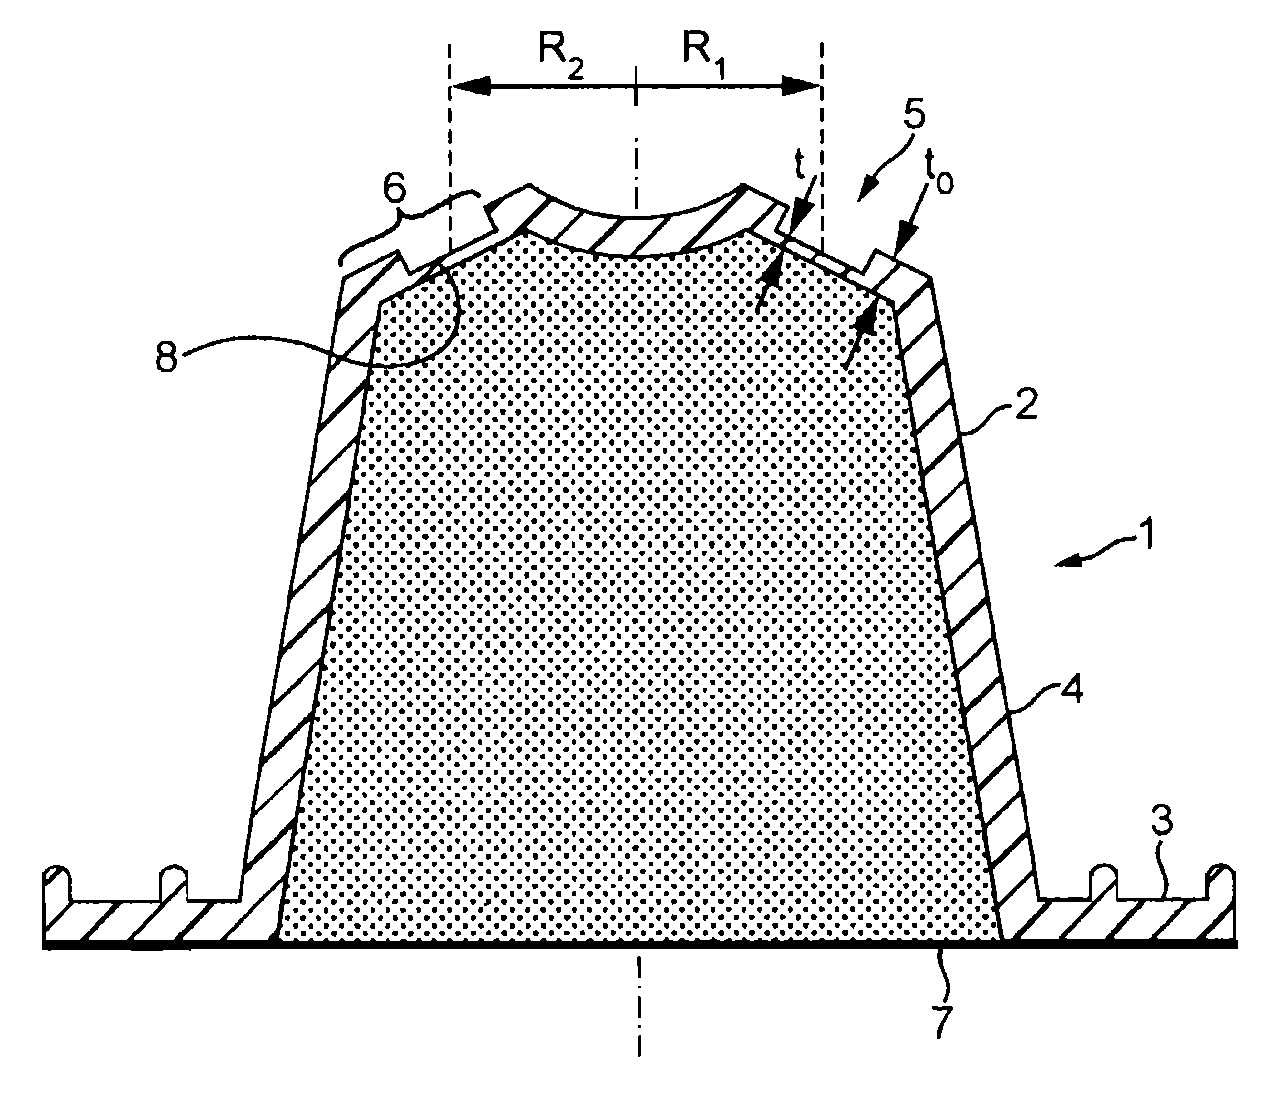 Capsule for the preparation of a coffee extract having a structure facilitating perforation for injection of water